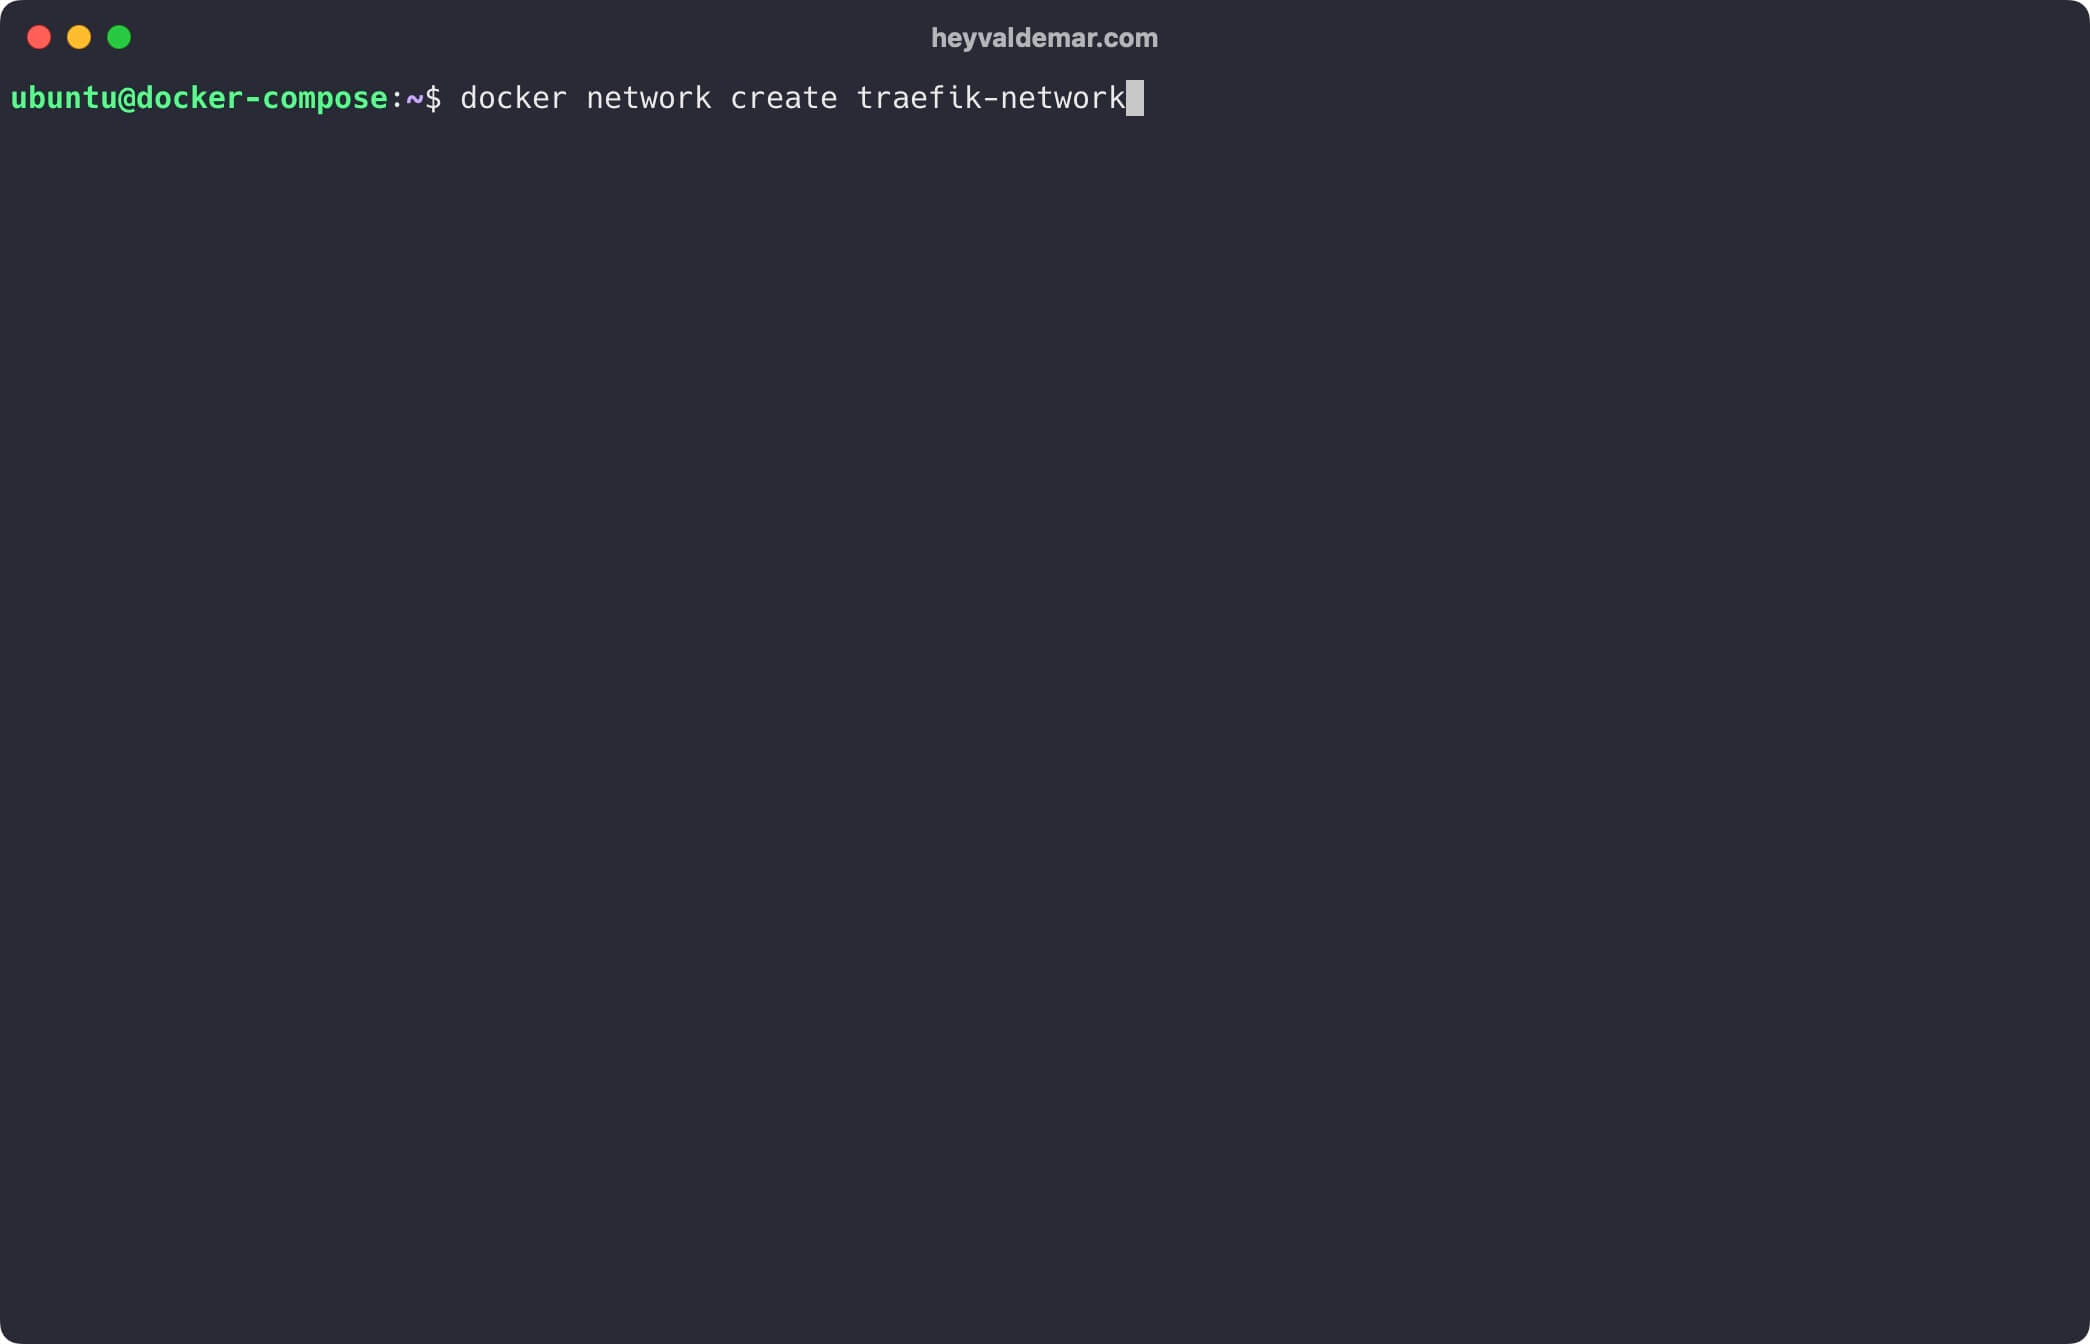 Install Outline and Keycloak Using Docker Compose